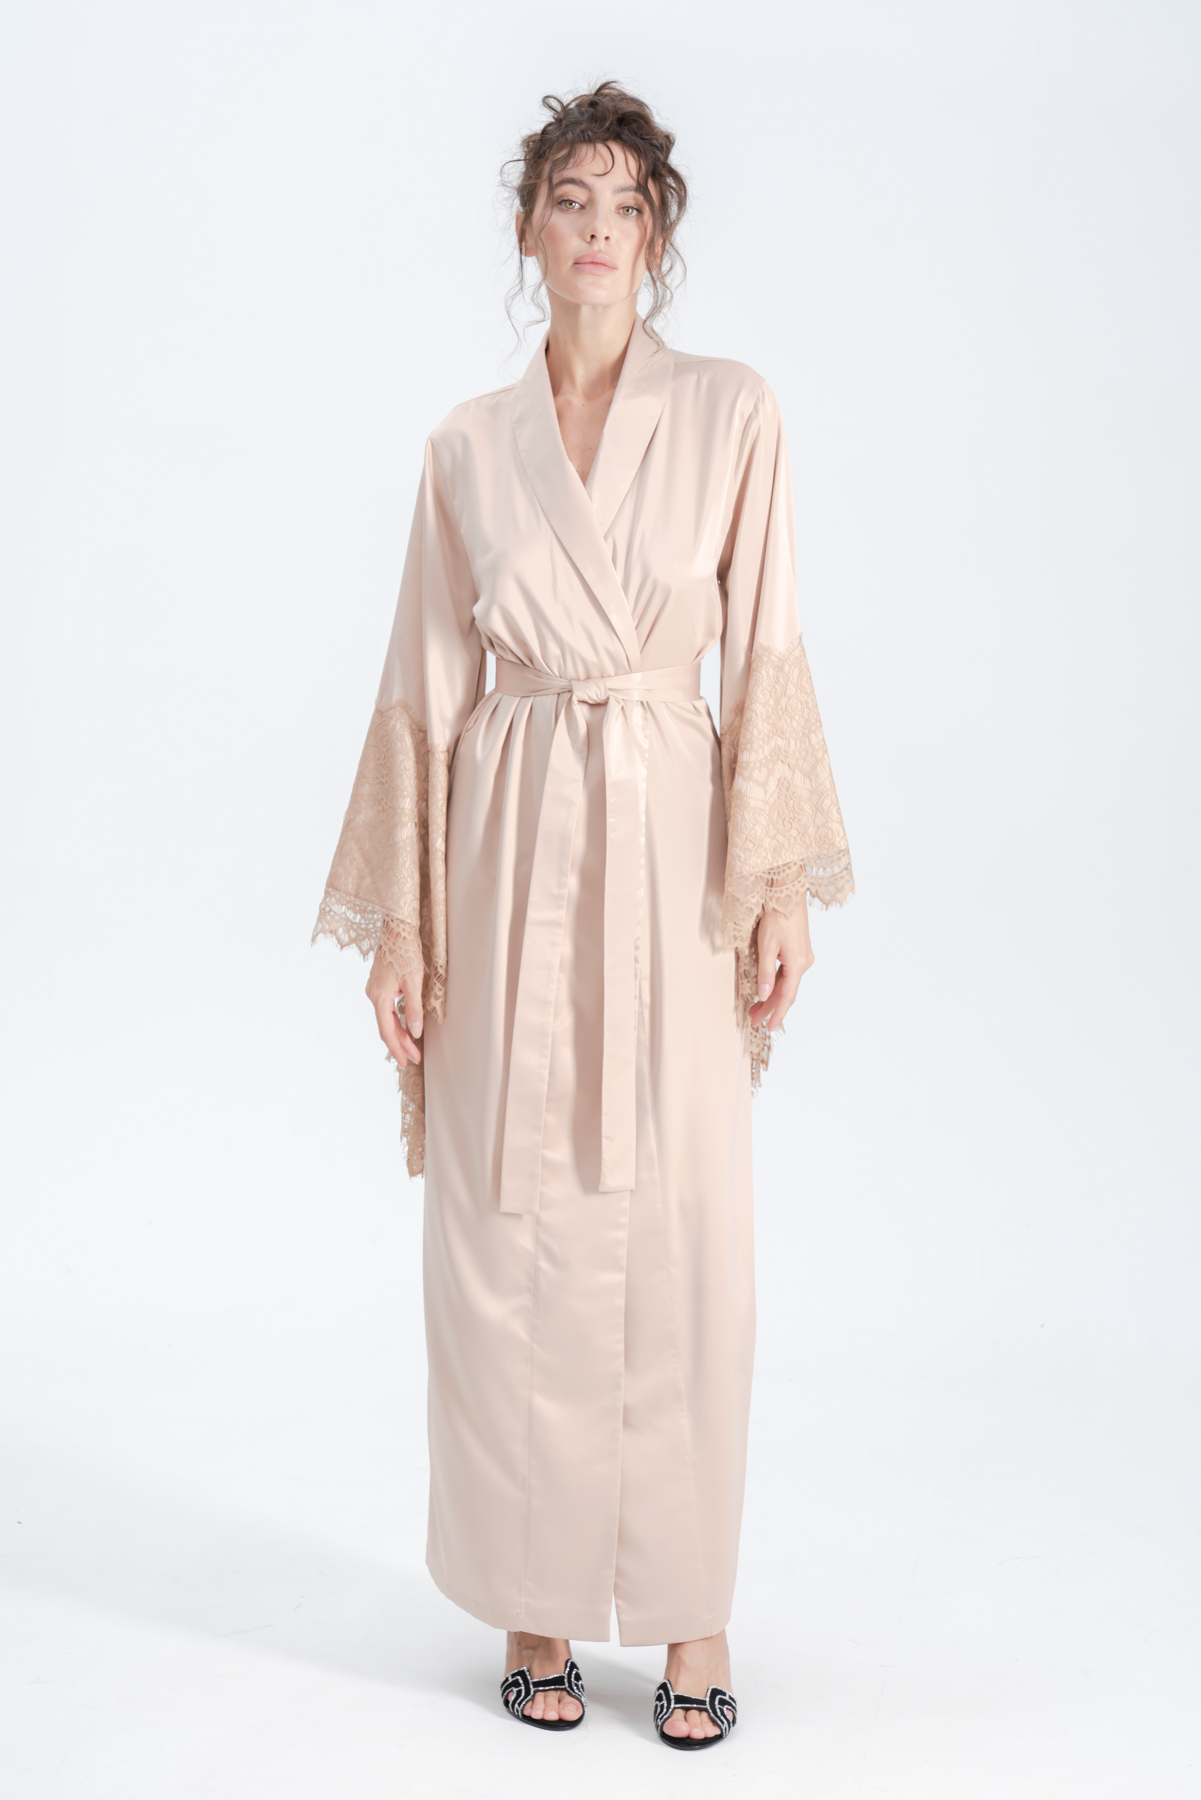 Blissy Classic Robe - White - 100% Pure Mulberry Silk Loungewear - One-Size